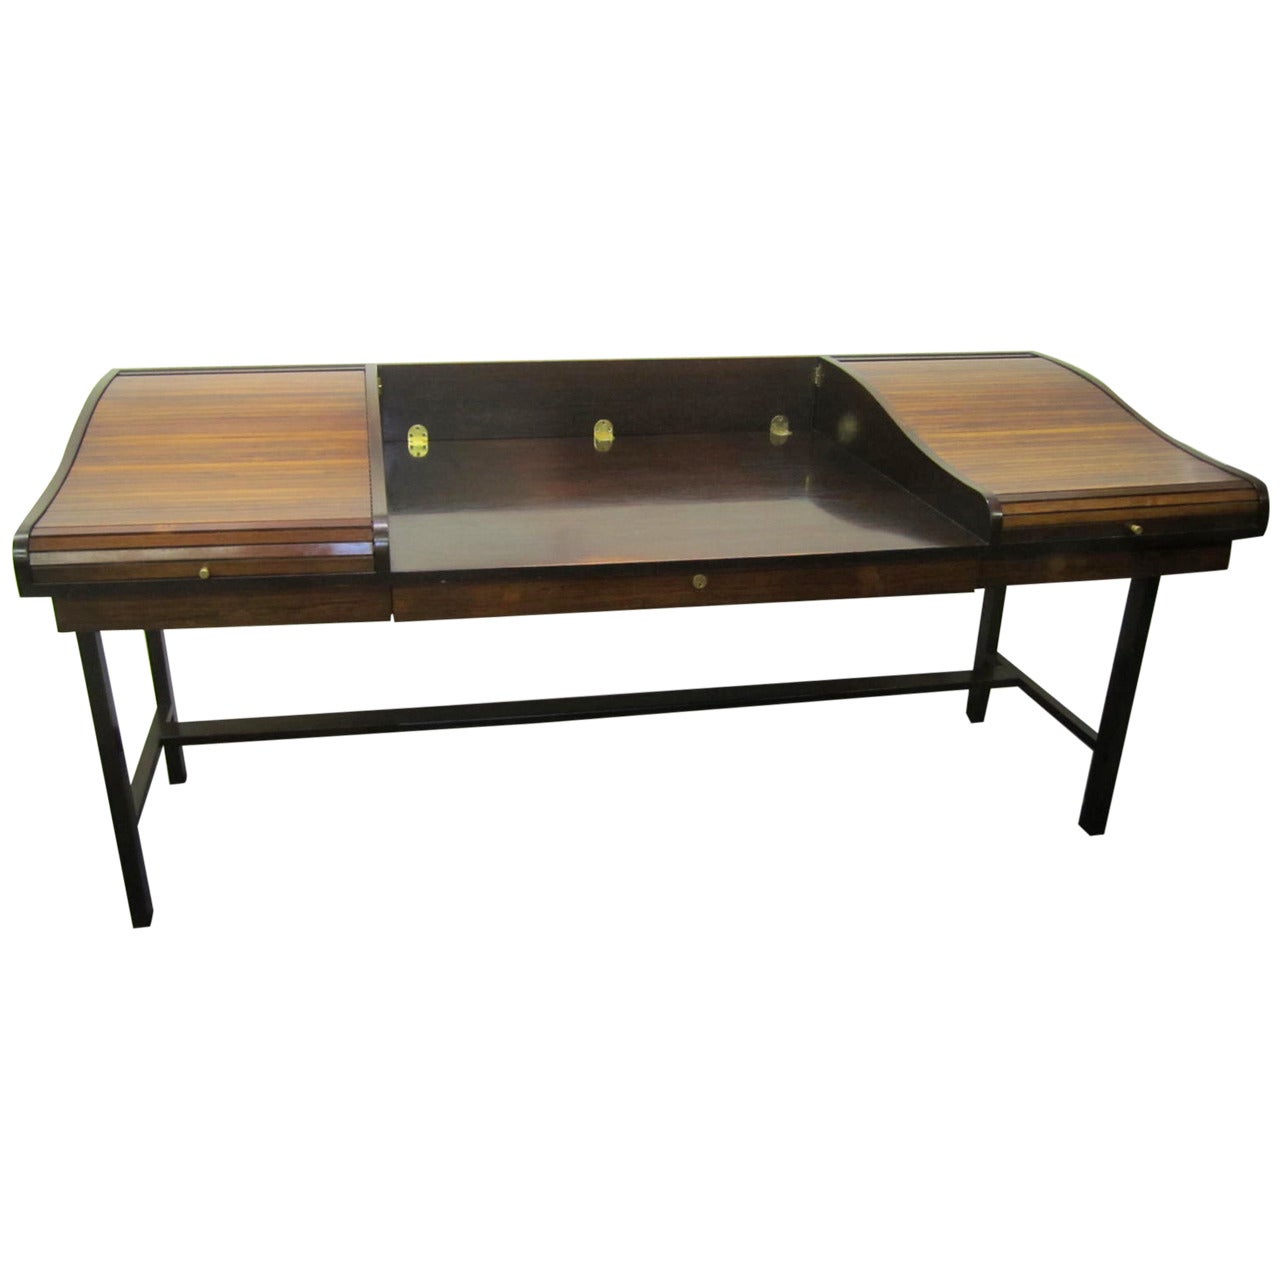 Excellent Rosewood Roll Top Desk by Edward Wormley for Dunbar Mid-Century Modern